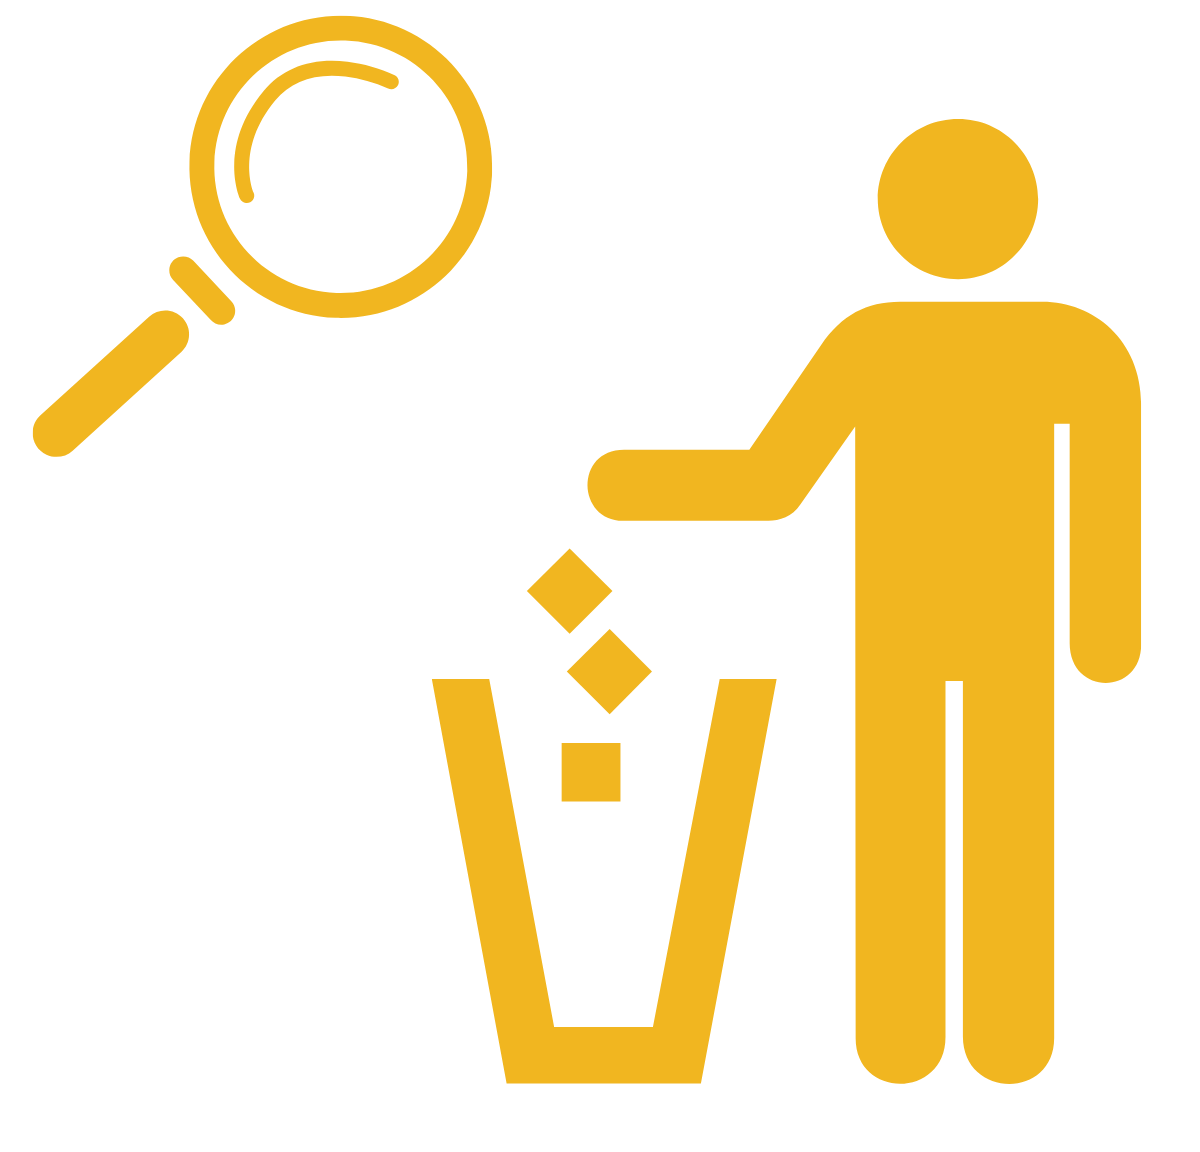 Yellow icon of a person throwing away trash with a magnifying glass next to it to demonstrate waste auditing.